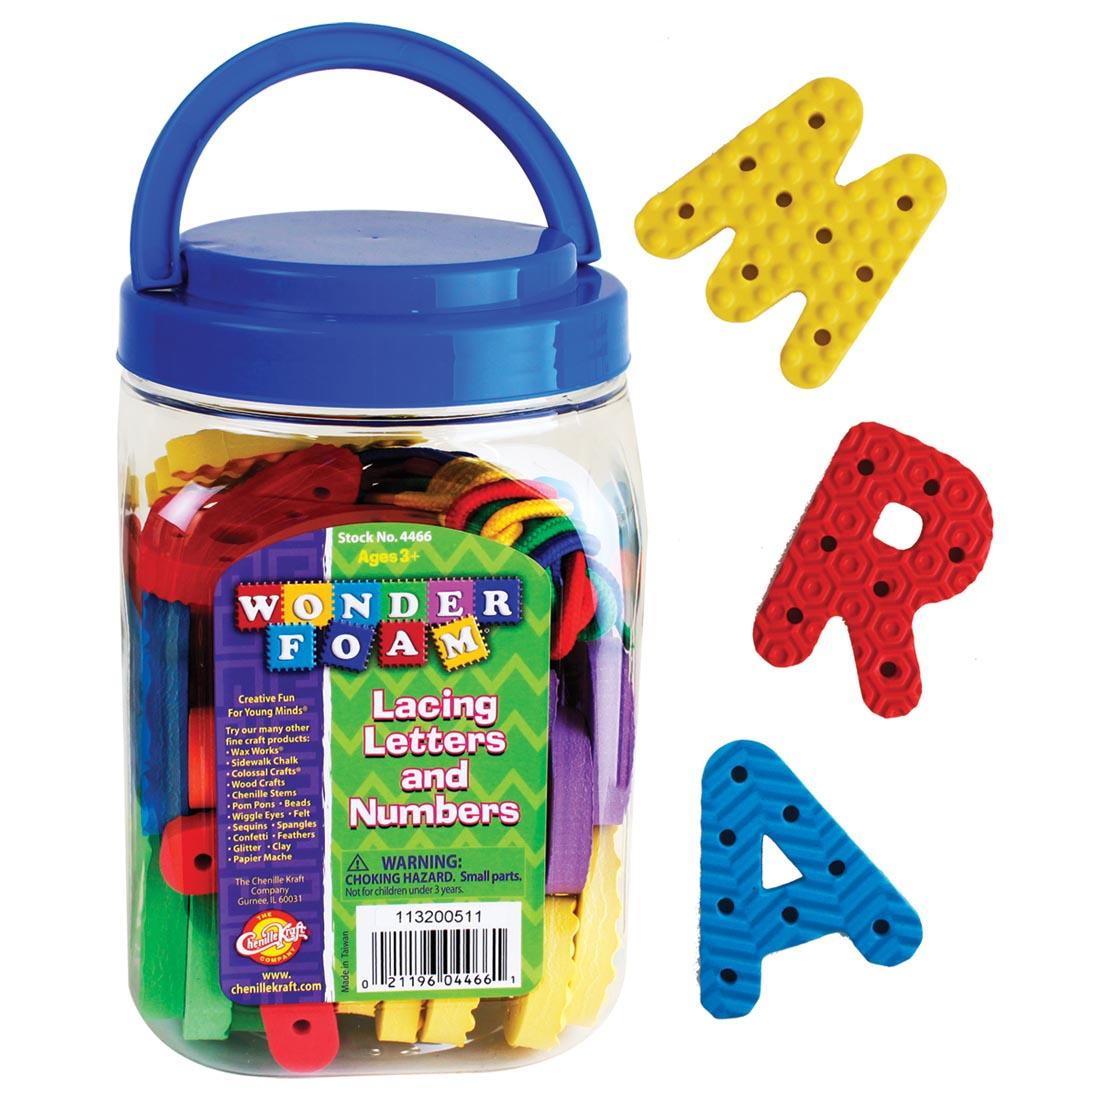 package of Creativity Street WonderFoam letters and numbers, with holes in each for lacing